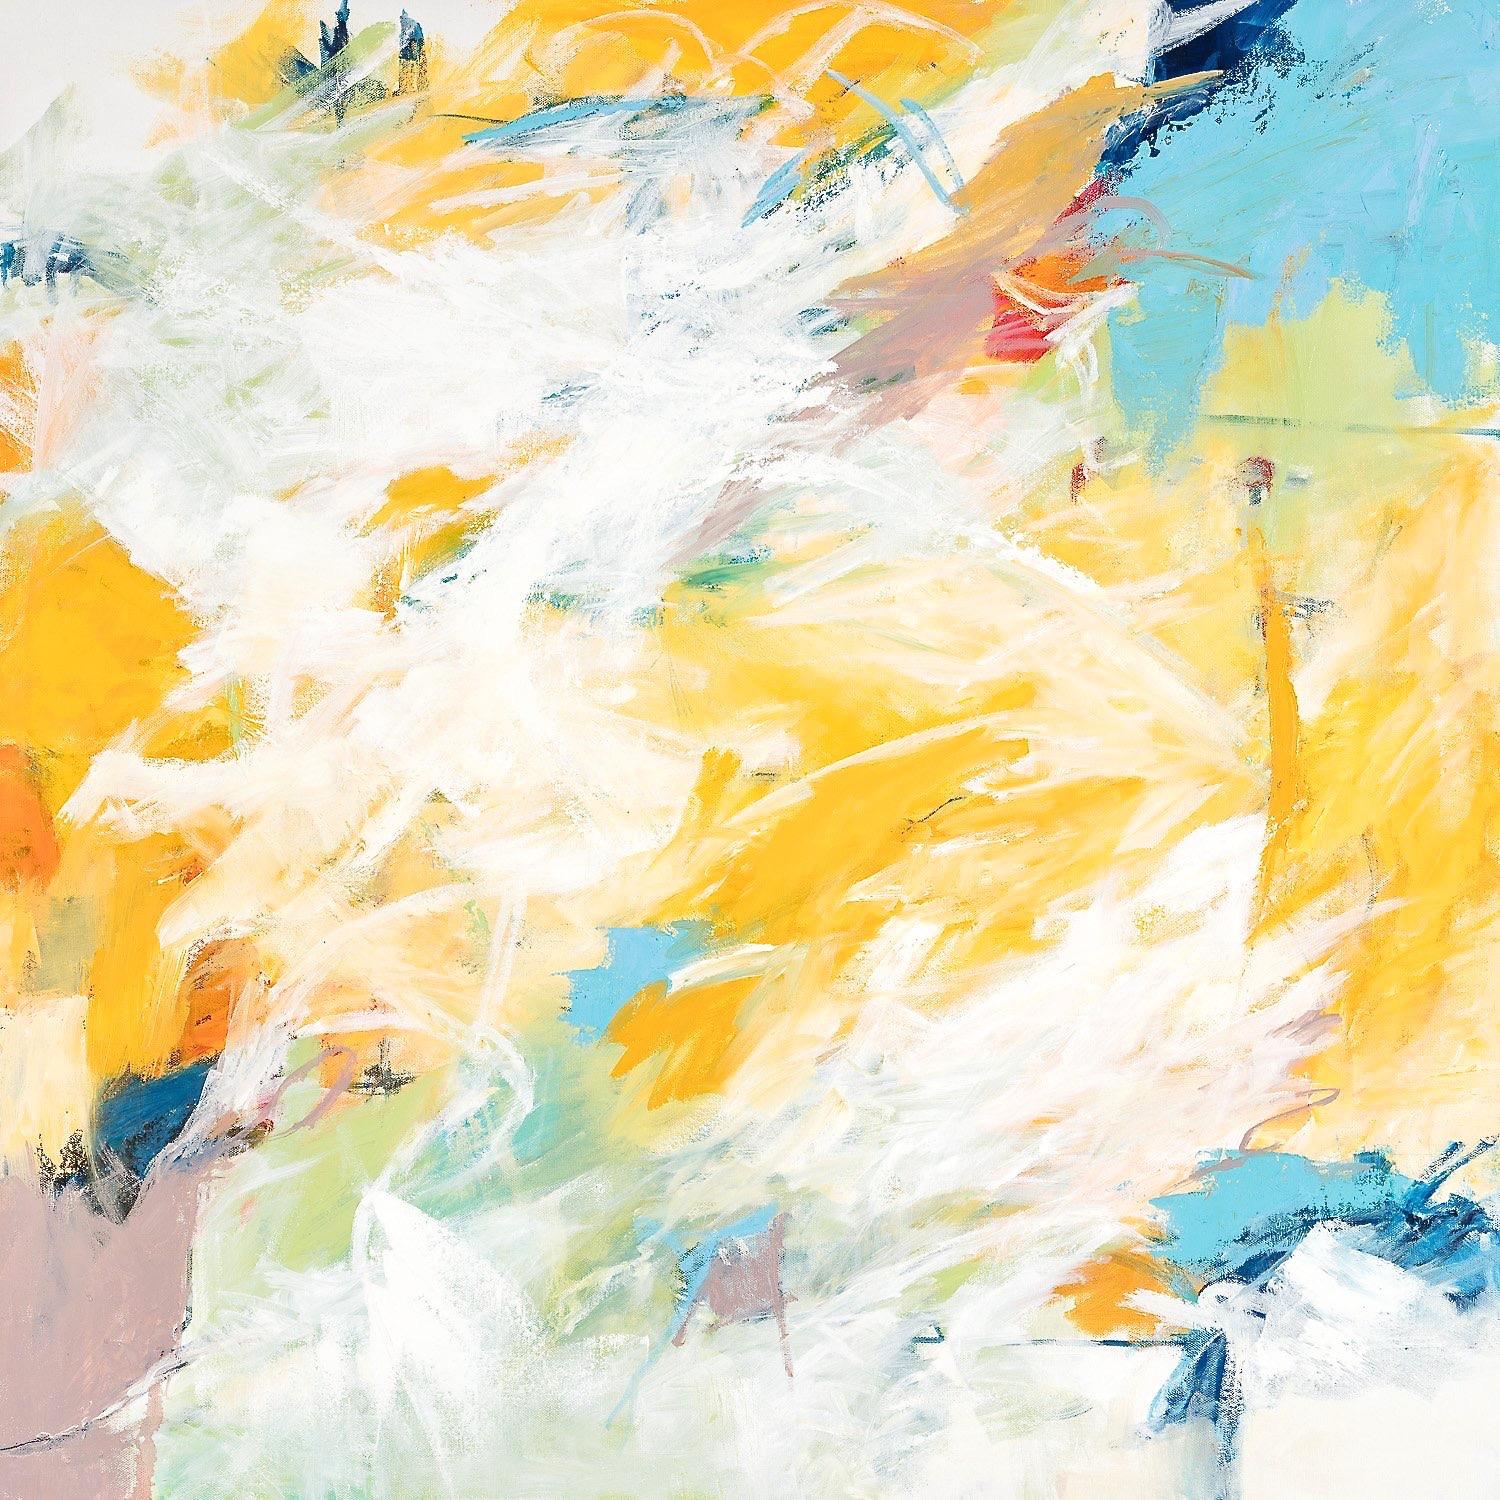 "Pools of Blue" Gestural Abstraction in Blue, White, Yellow, Orange and Black